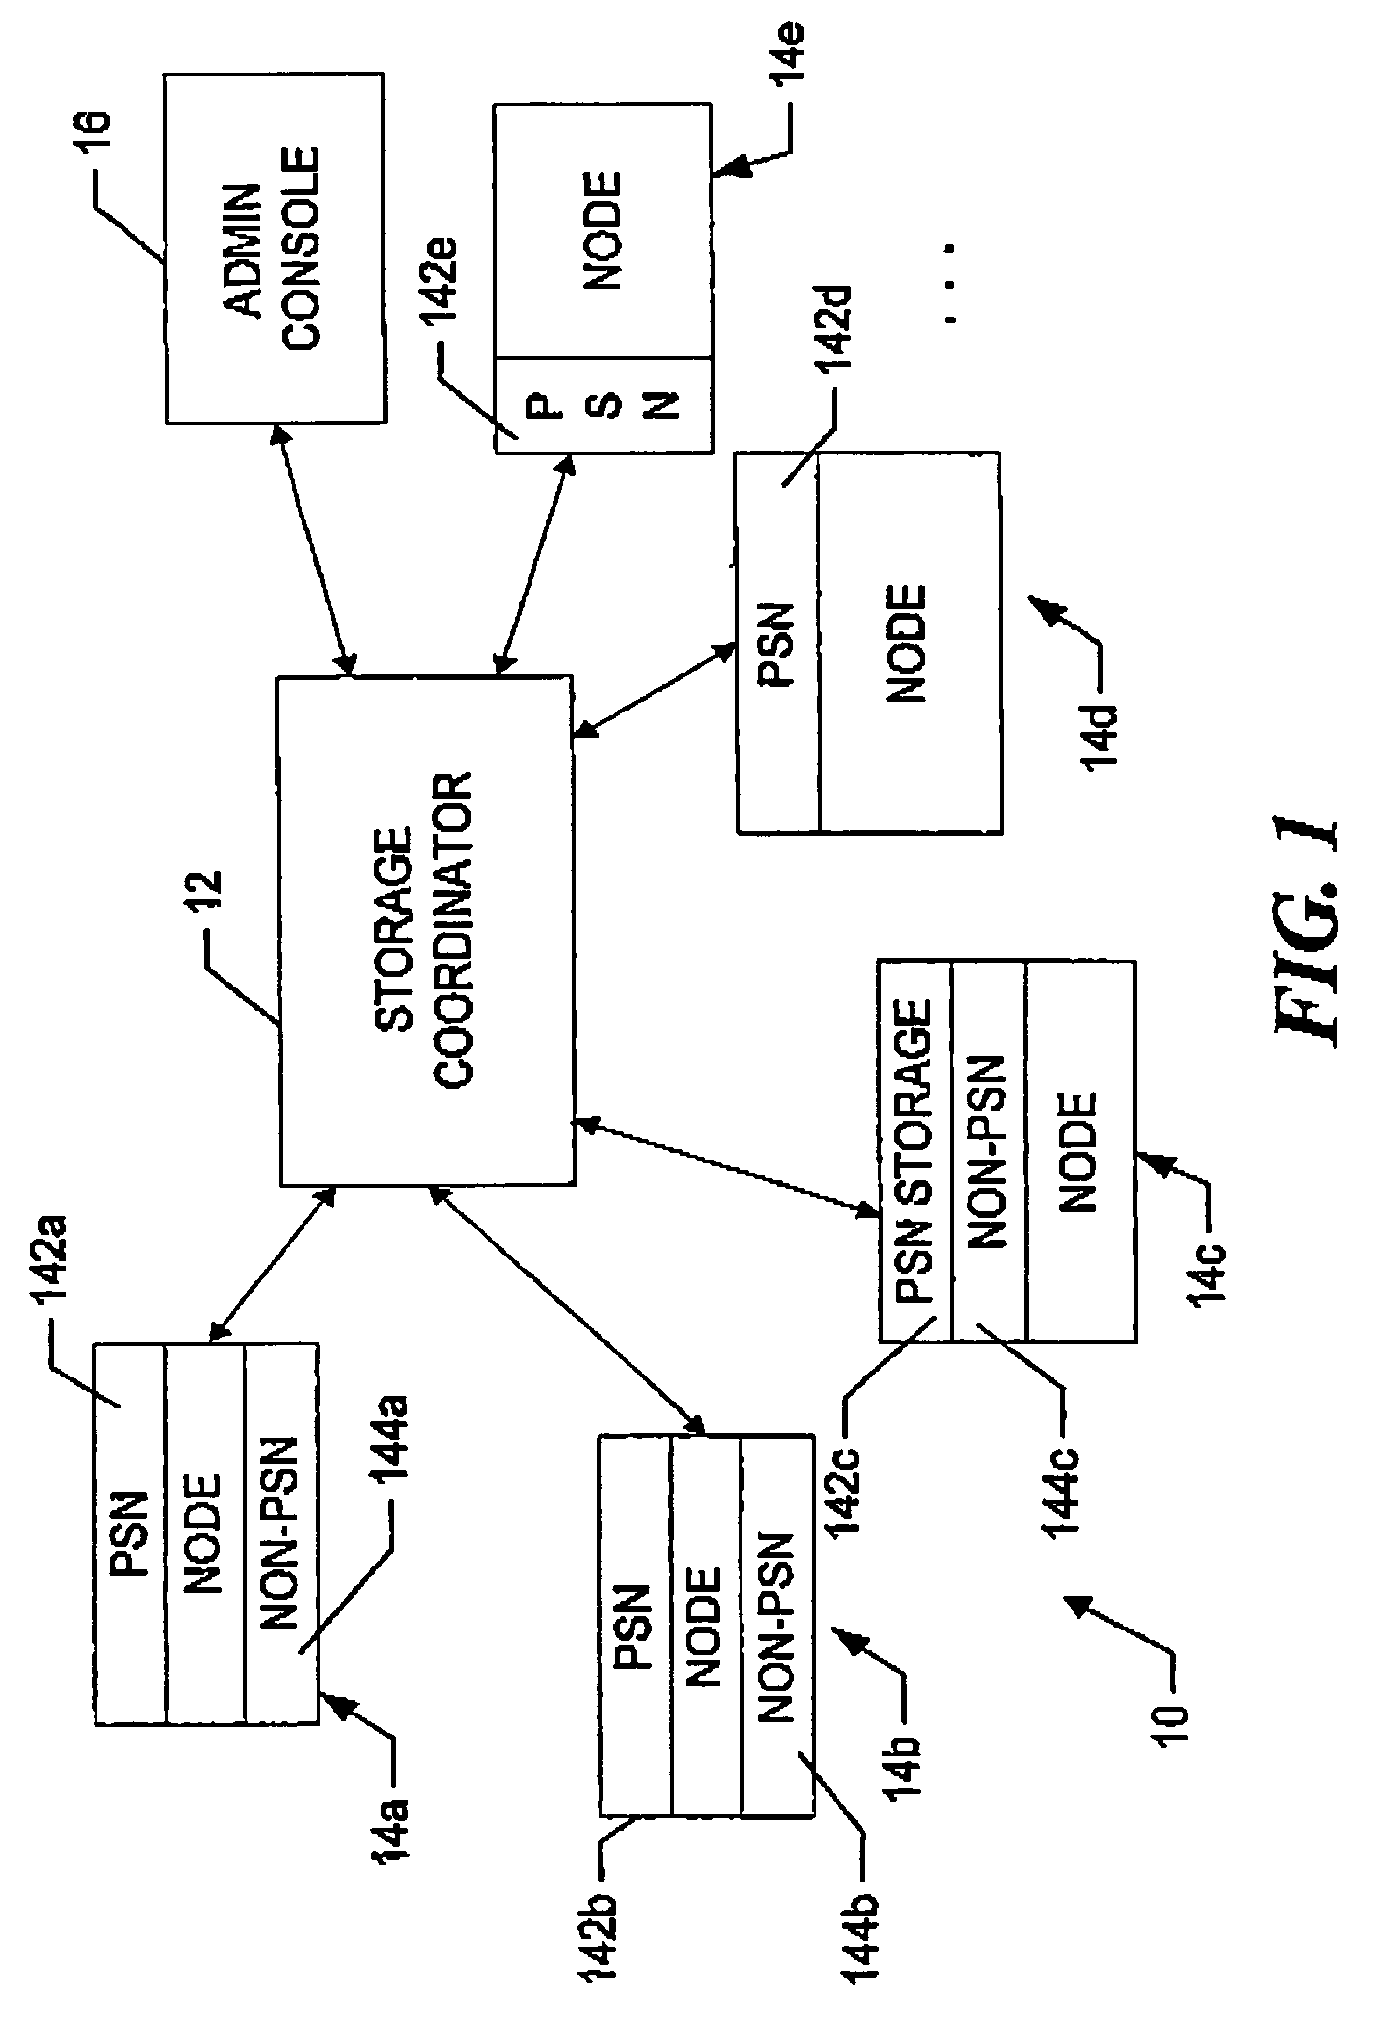 Peer to peer enterprise storage system with lexical recovery sub-system